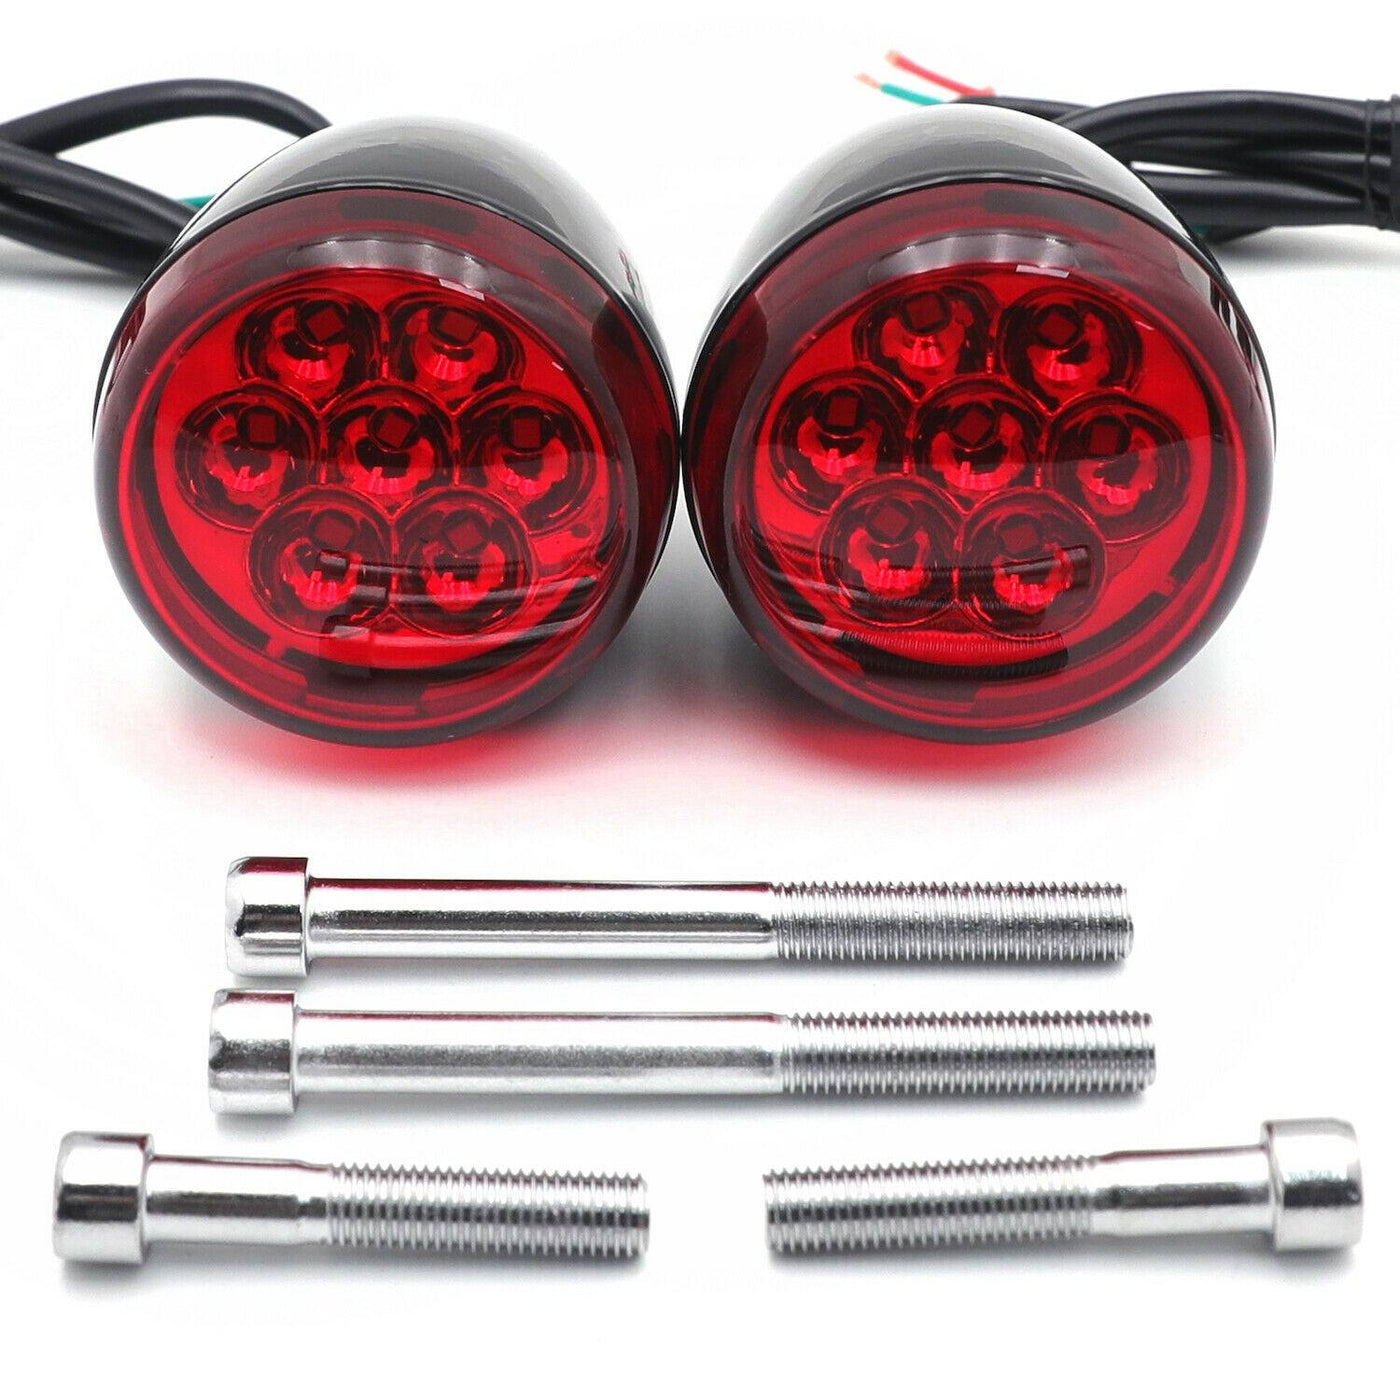 Rear Running Brake Turn Signal Light Indicator For Harley XL883 1200 FXD FXDB FX - Moto Life Products